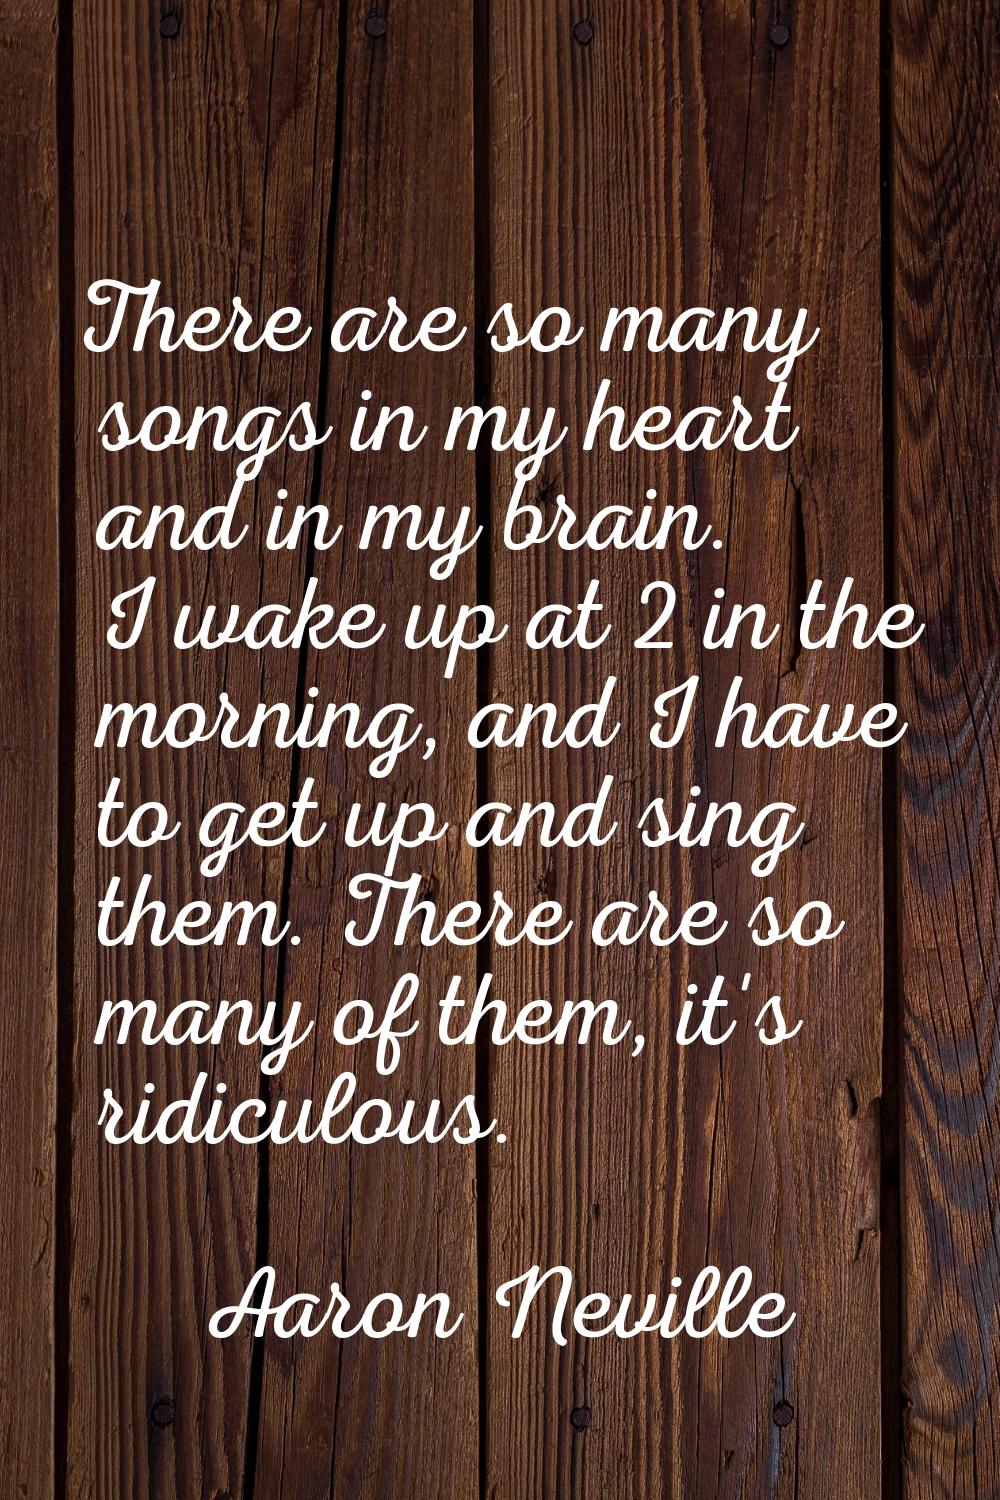 There are so many songs in my heart and in my brain. I wake up at 2 in the morning, and I have to g